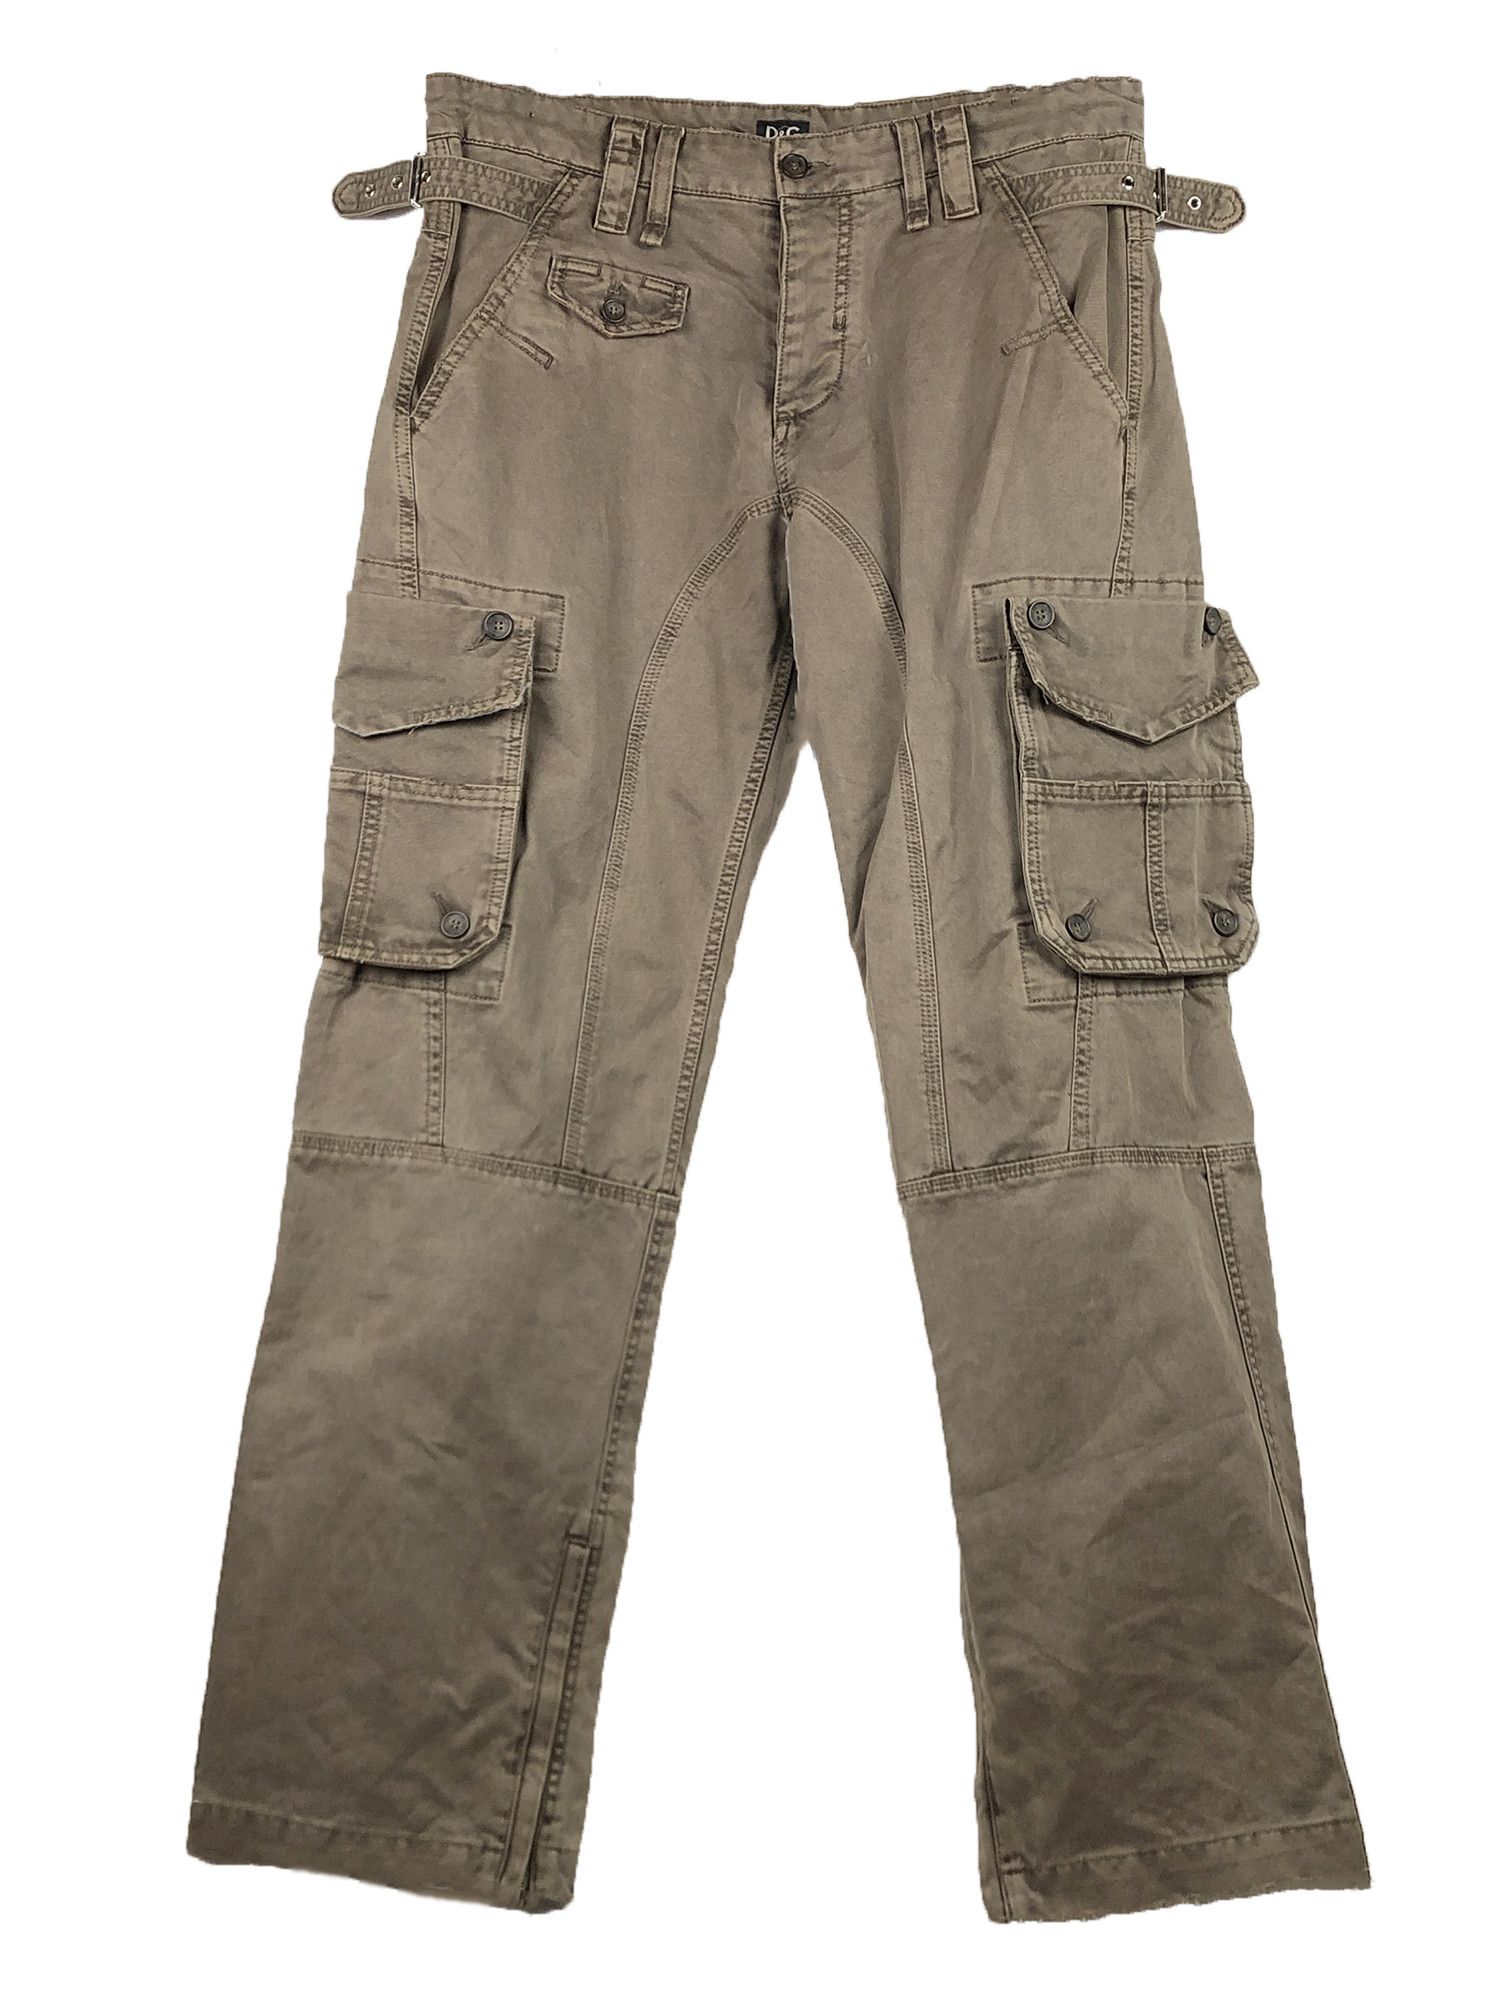 archive OLD GAP gimmick cargo pants y2k - パンツ